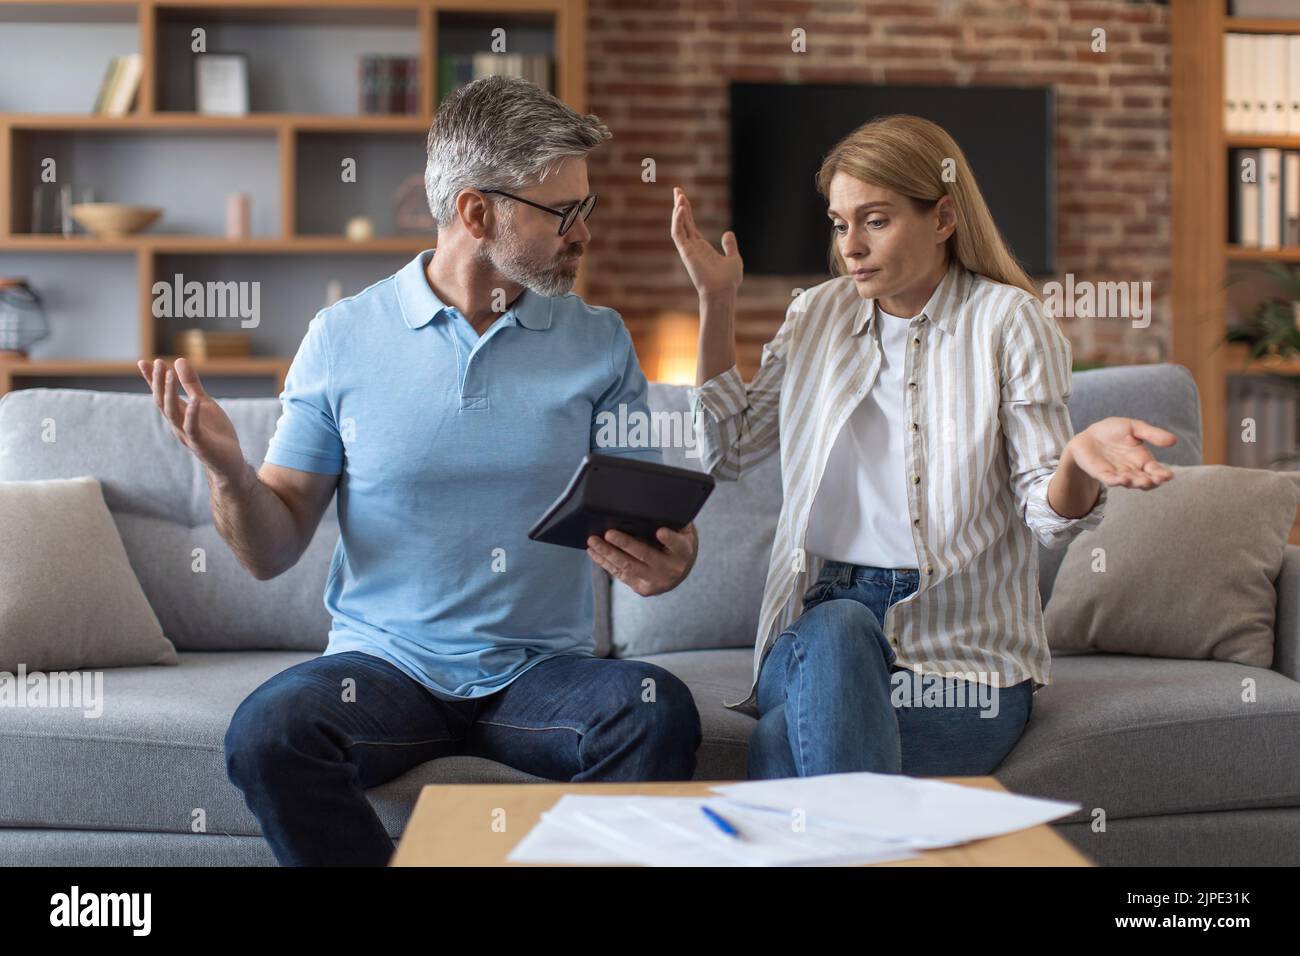 Sad adult caucasian family work with documents and tablet, quarreling in room interior Stock Photo